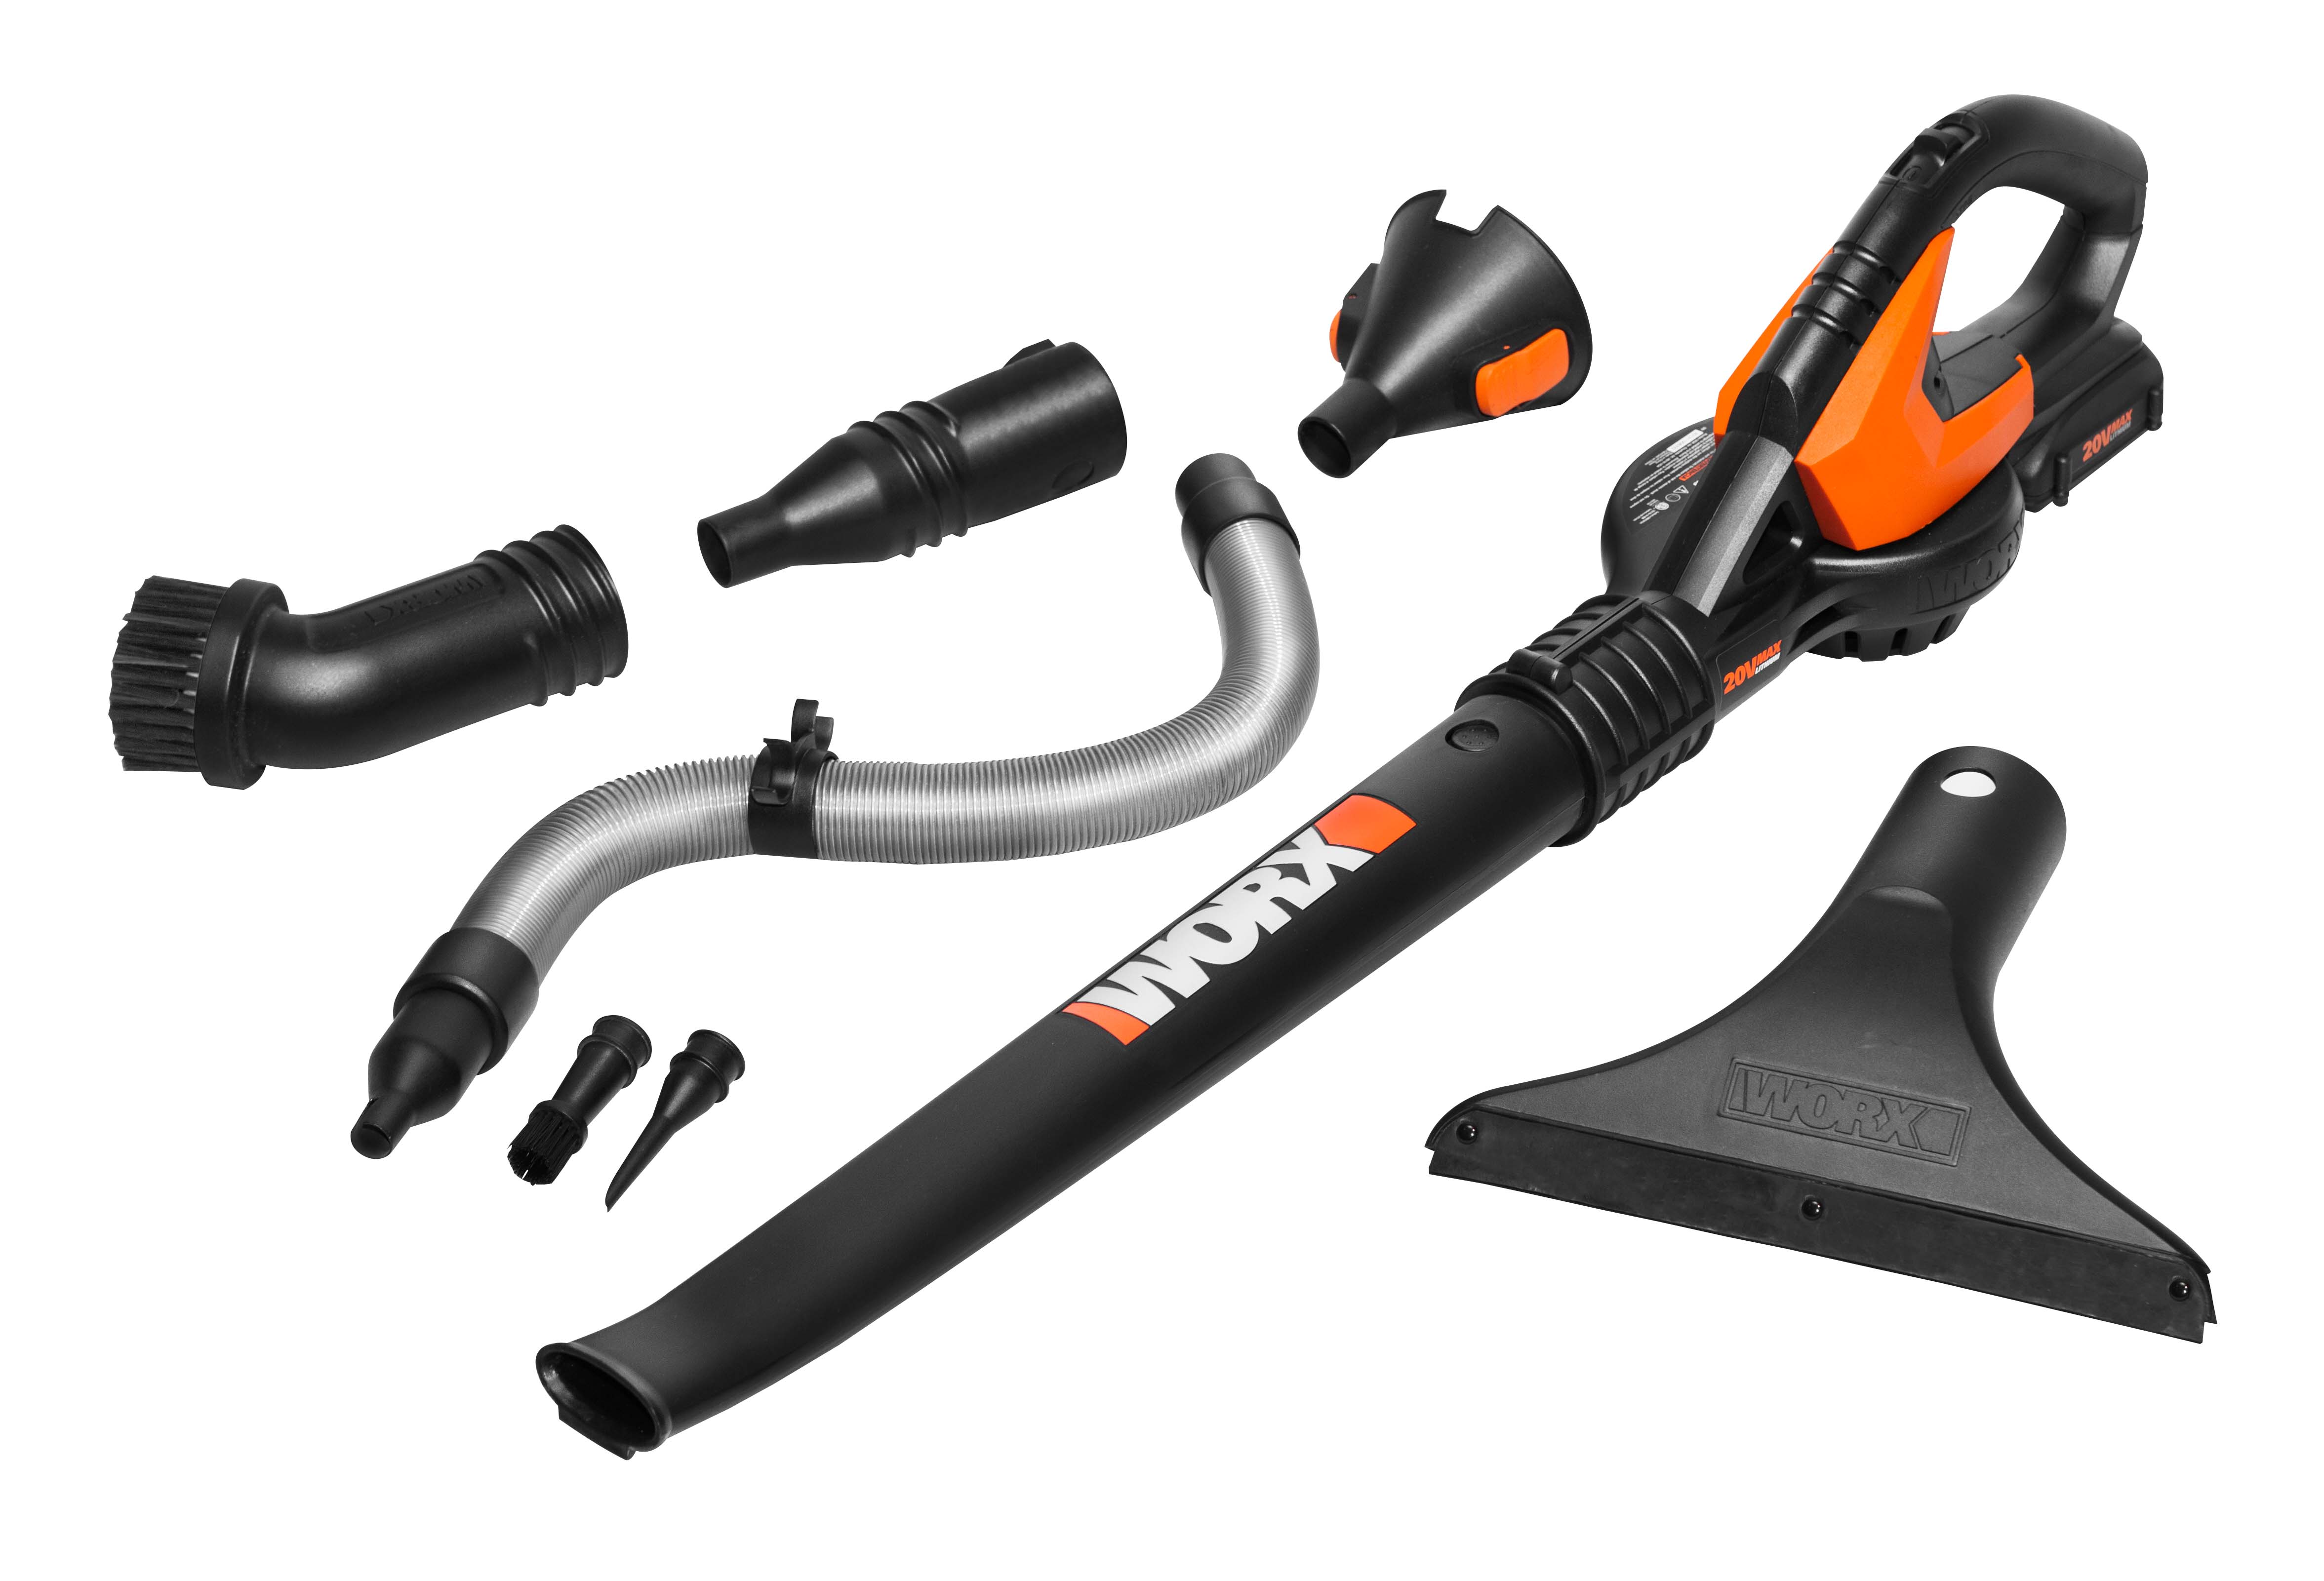 WORX AIR cordless blower/sweeper includes eight special-purpose attachments.